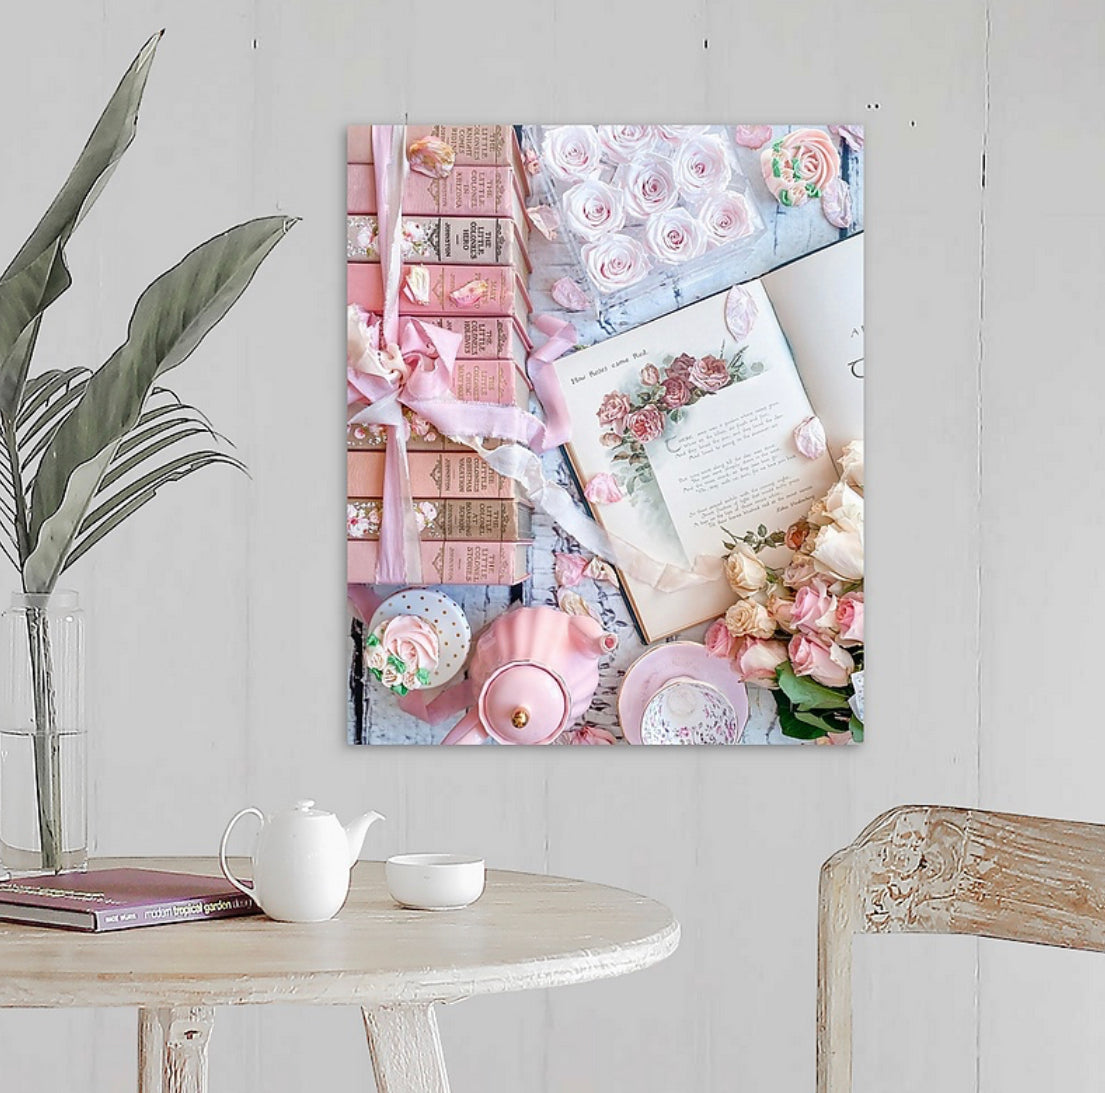 Pink books and Roses Gallery Wrapped Canvas